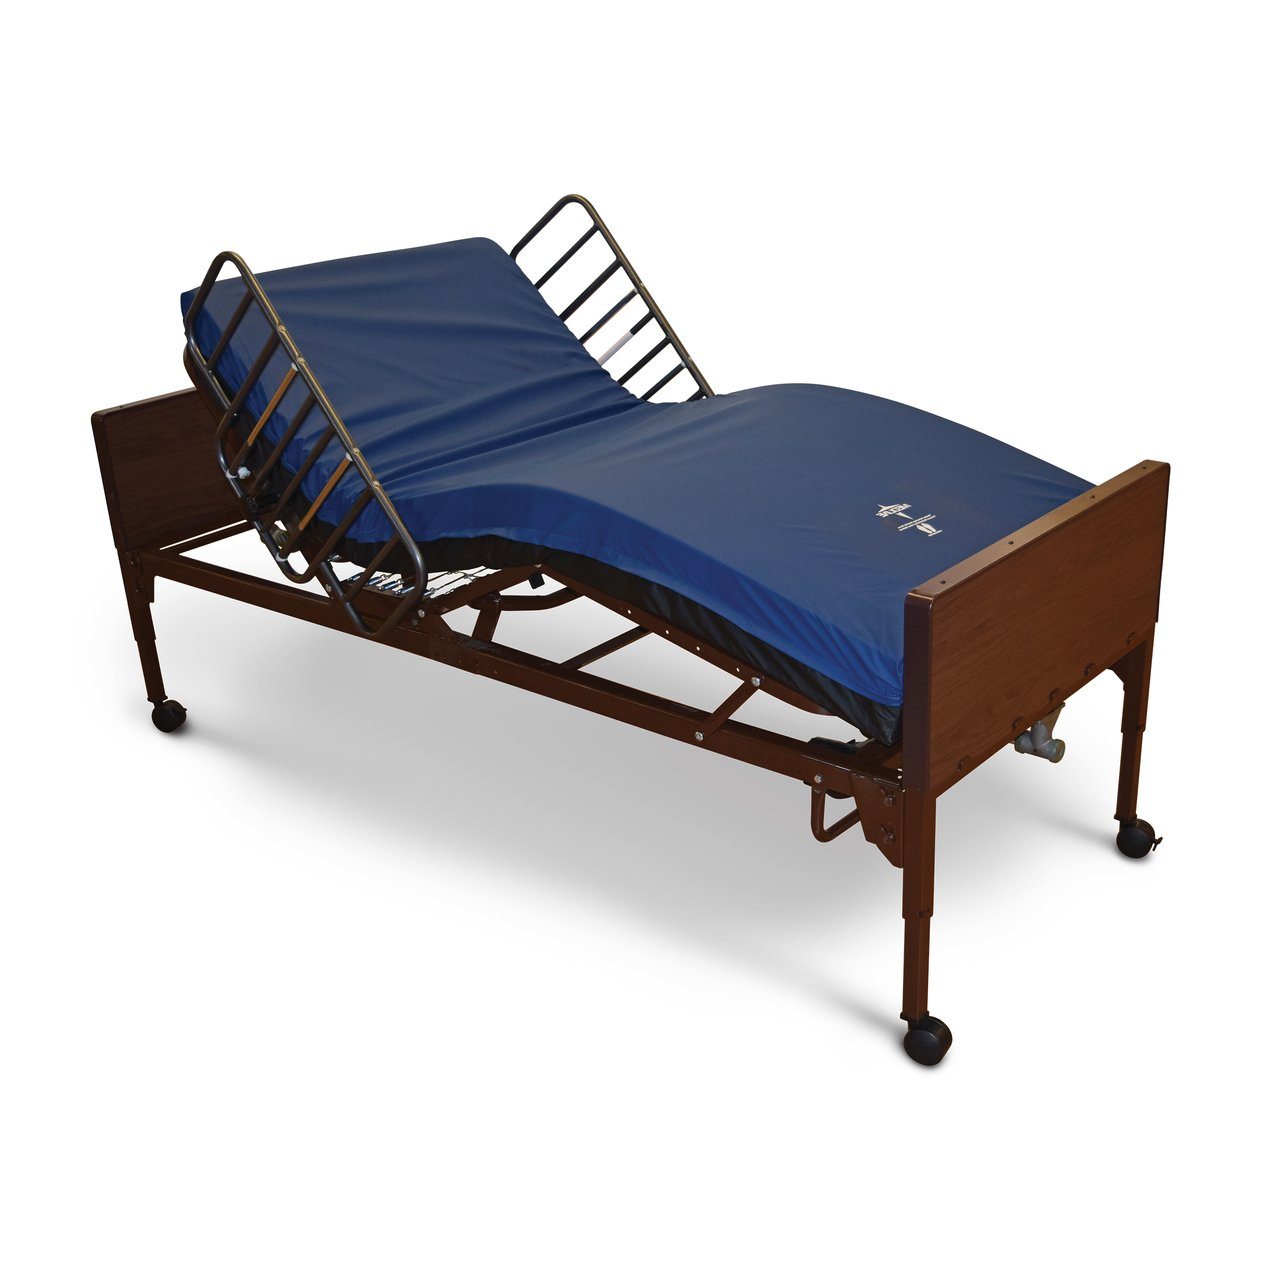 Adjustable Beds & Electric Beds, Fast Delivery